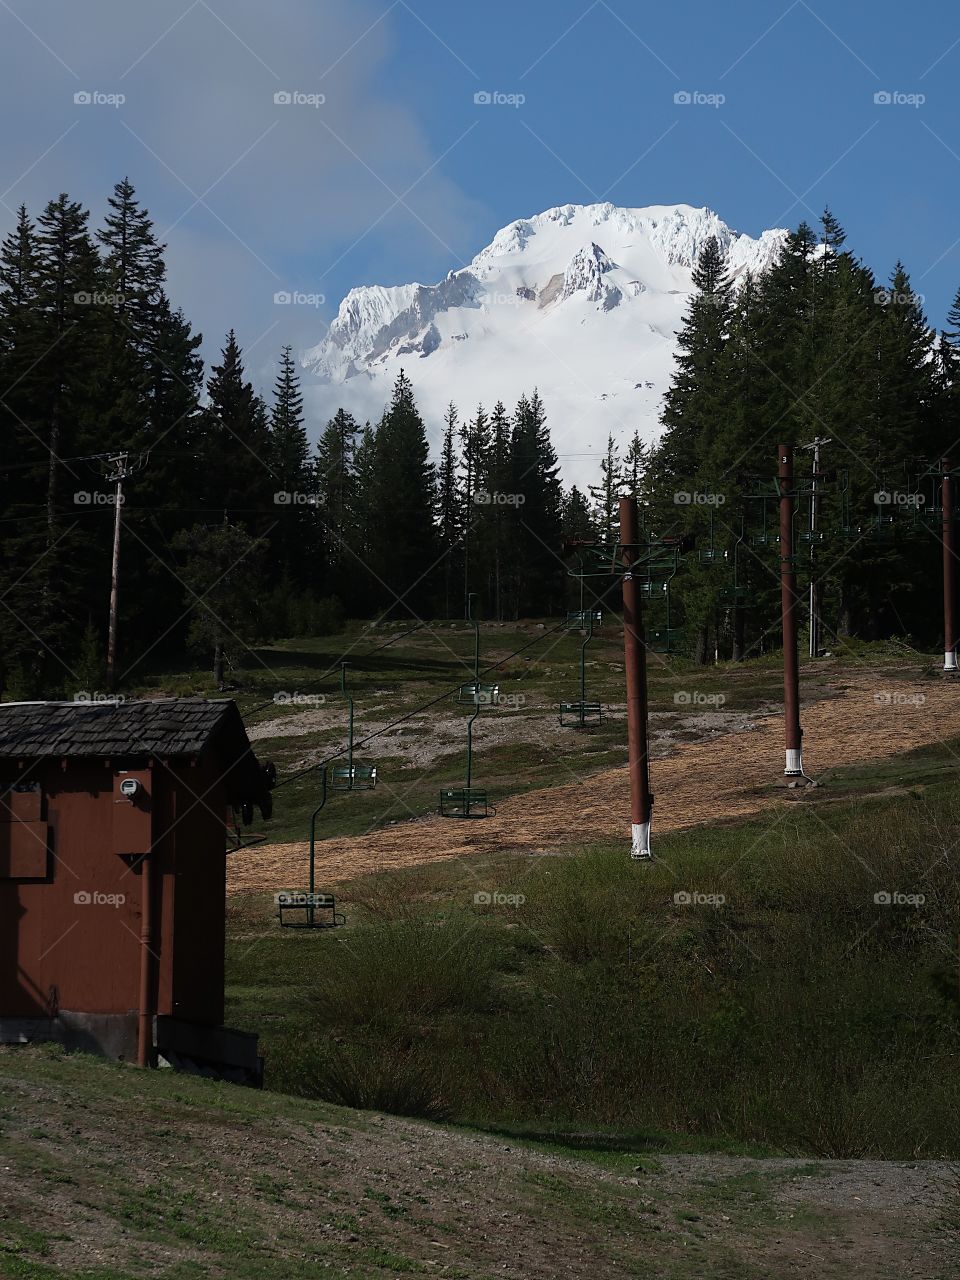 The magnificent Mt. Hood in Oregon’s Cascade Mountain Range covered in fresh springtime snow on a beautiful sunny day. 